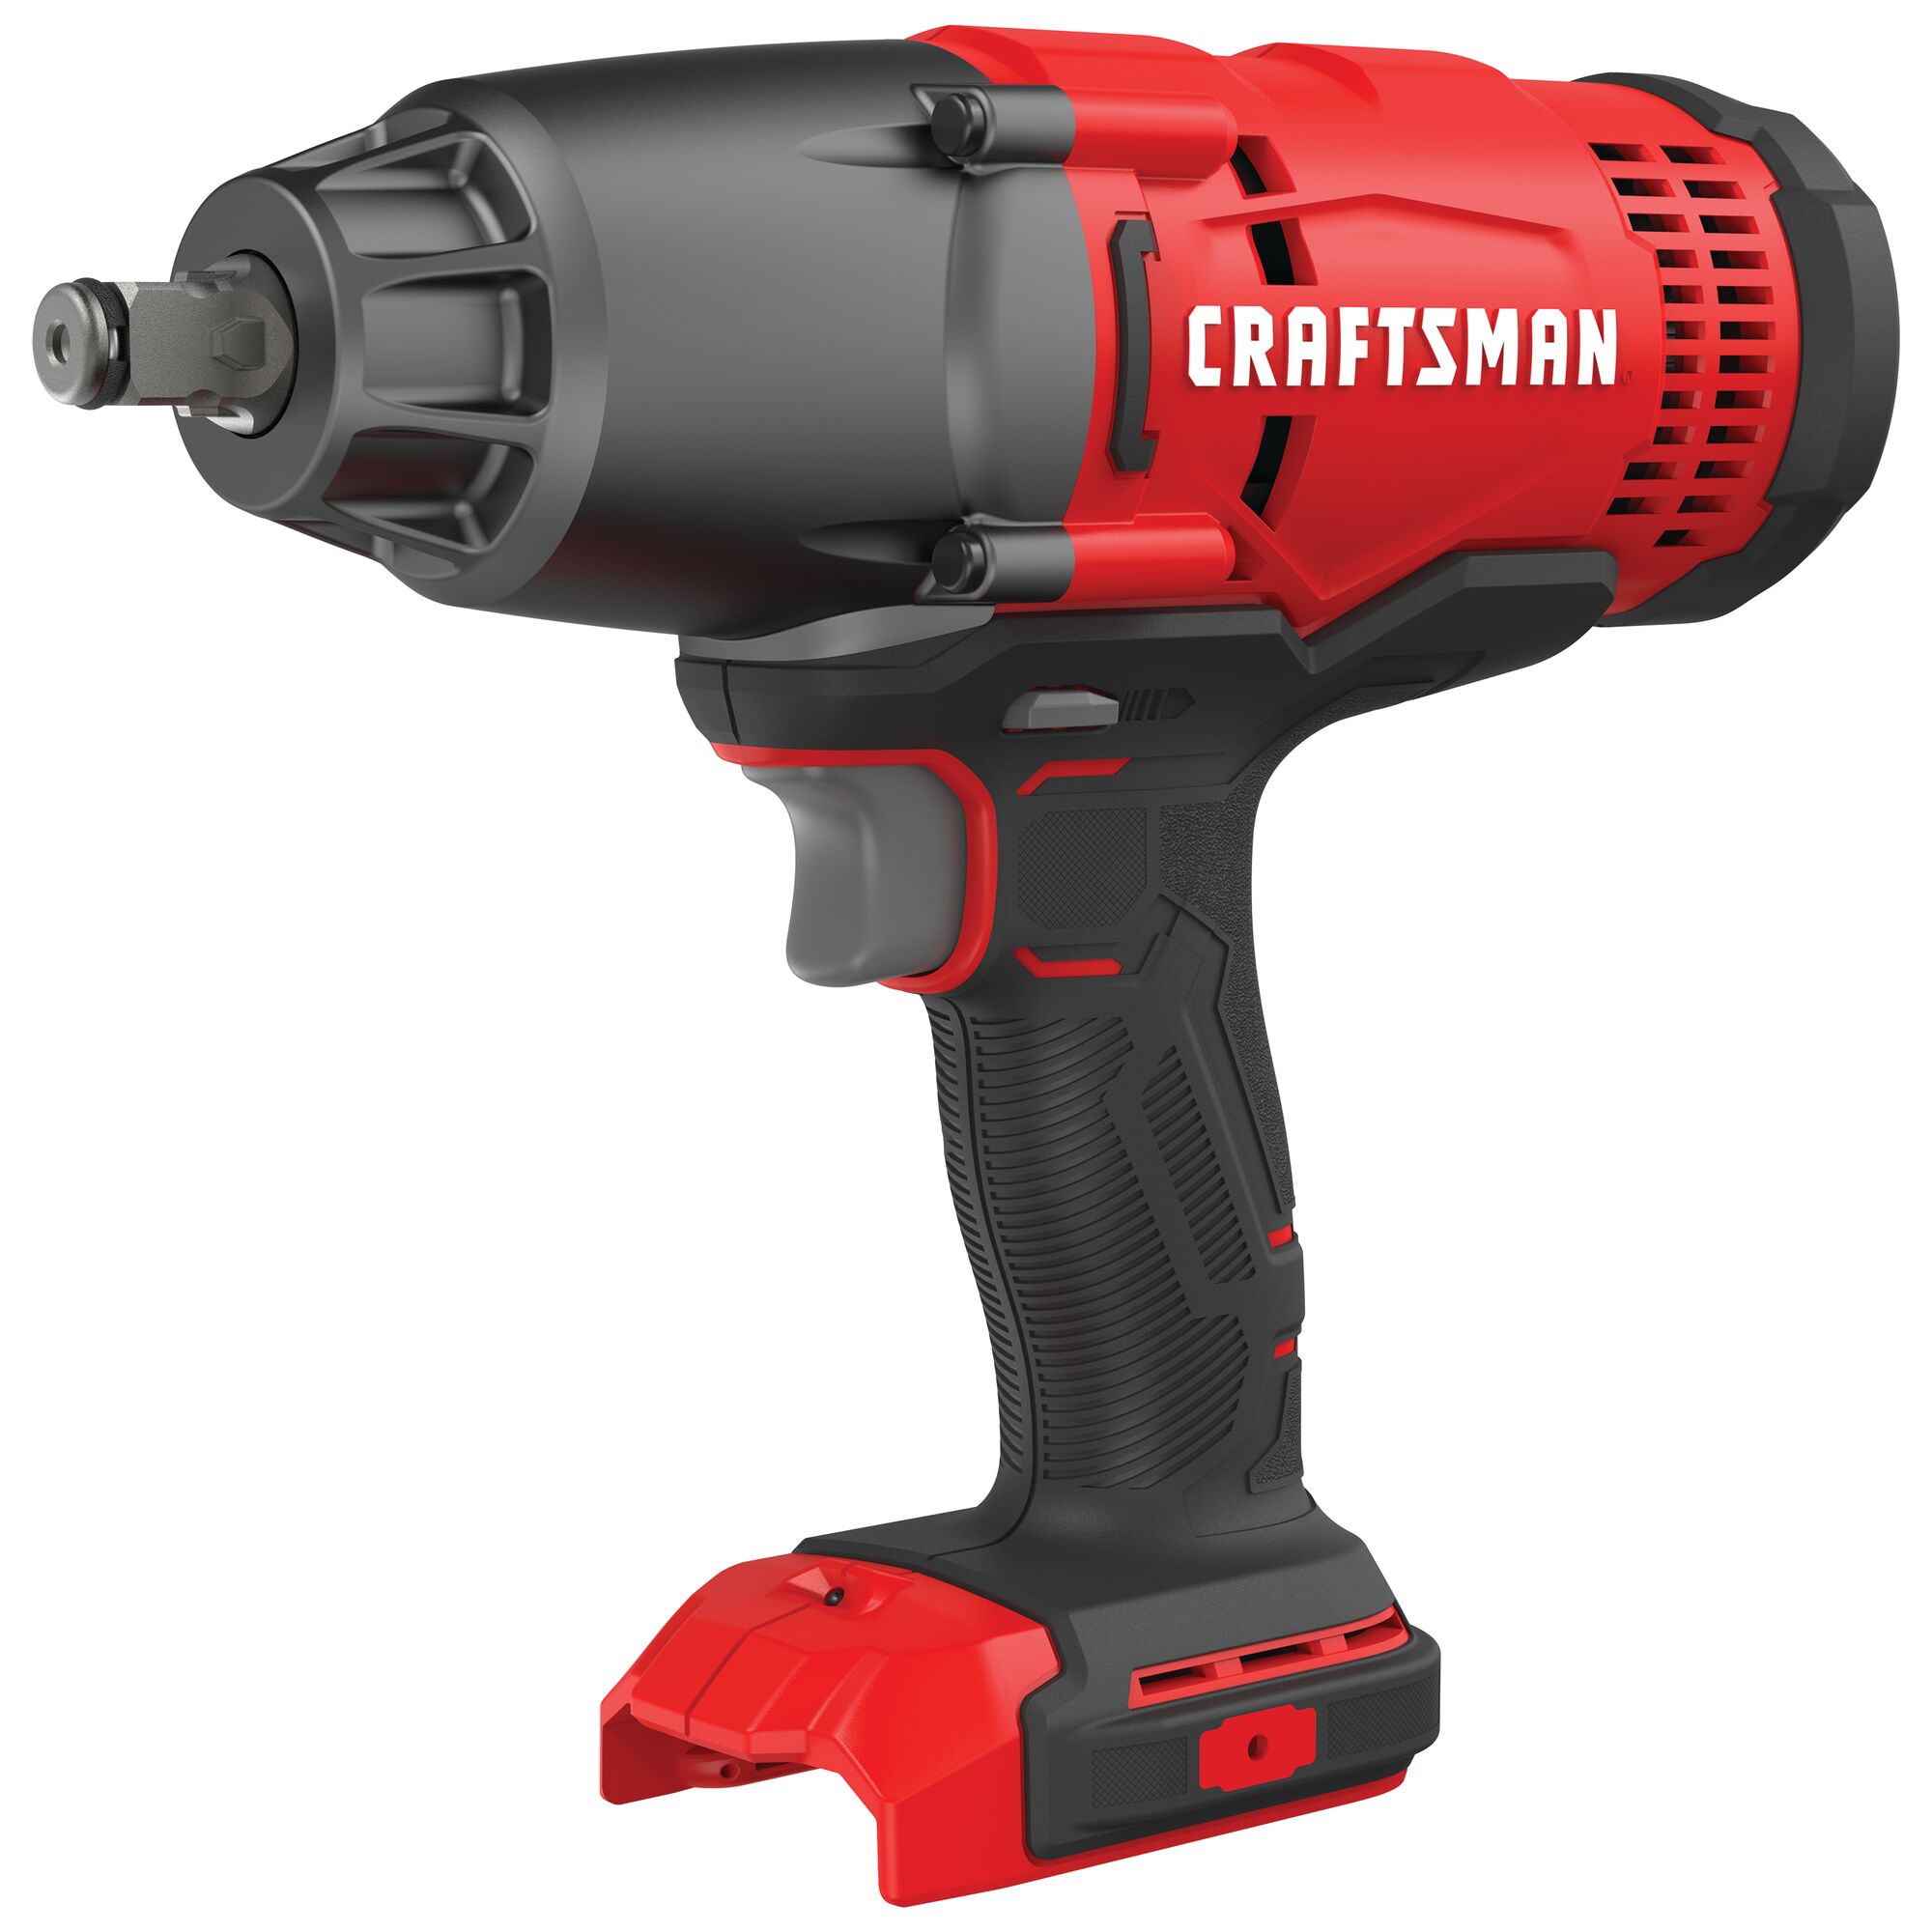 Cordless half inch impact wrench tool.